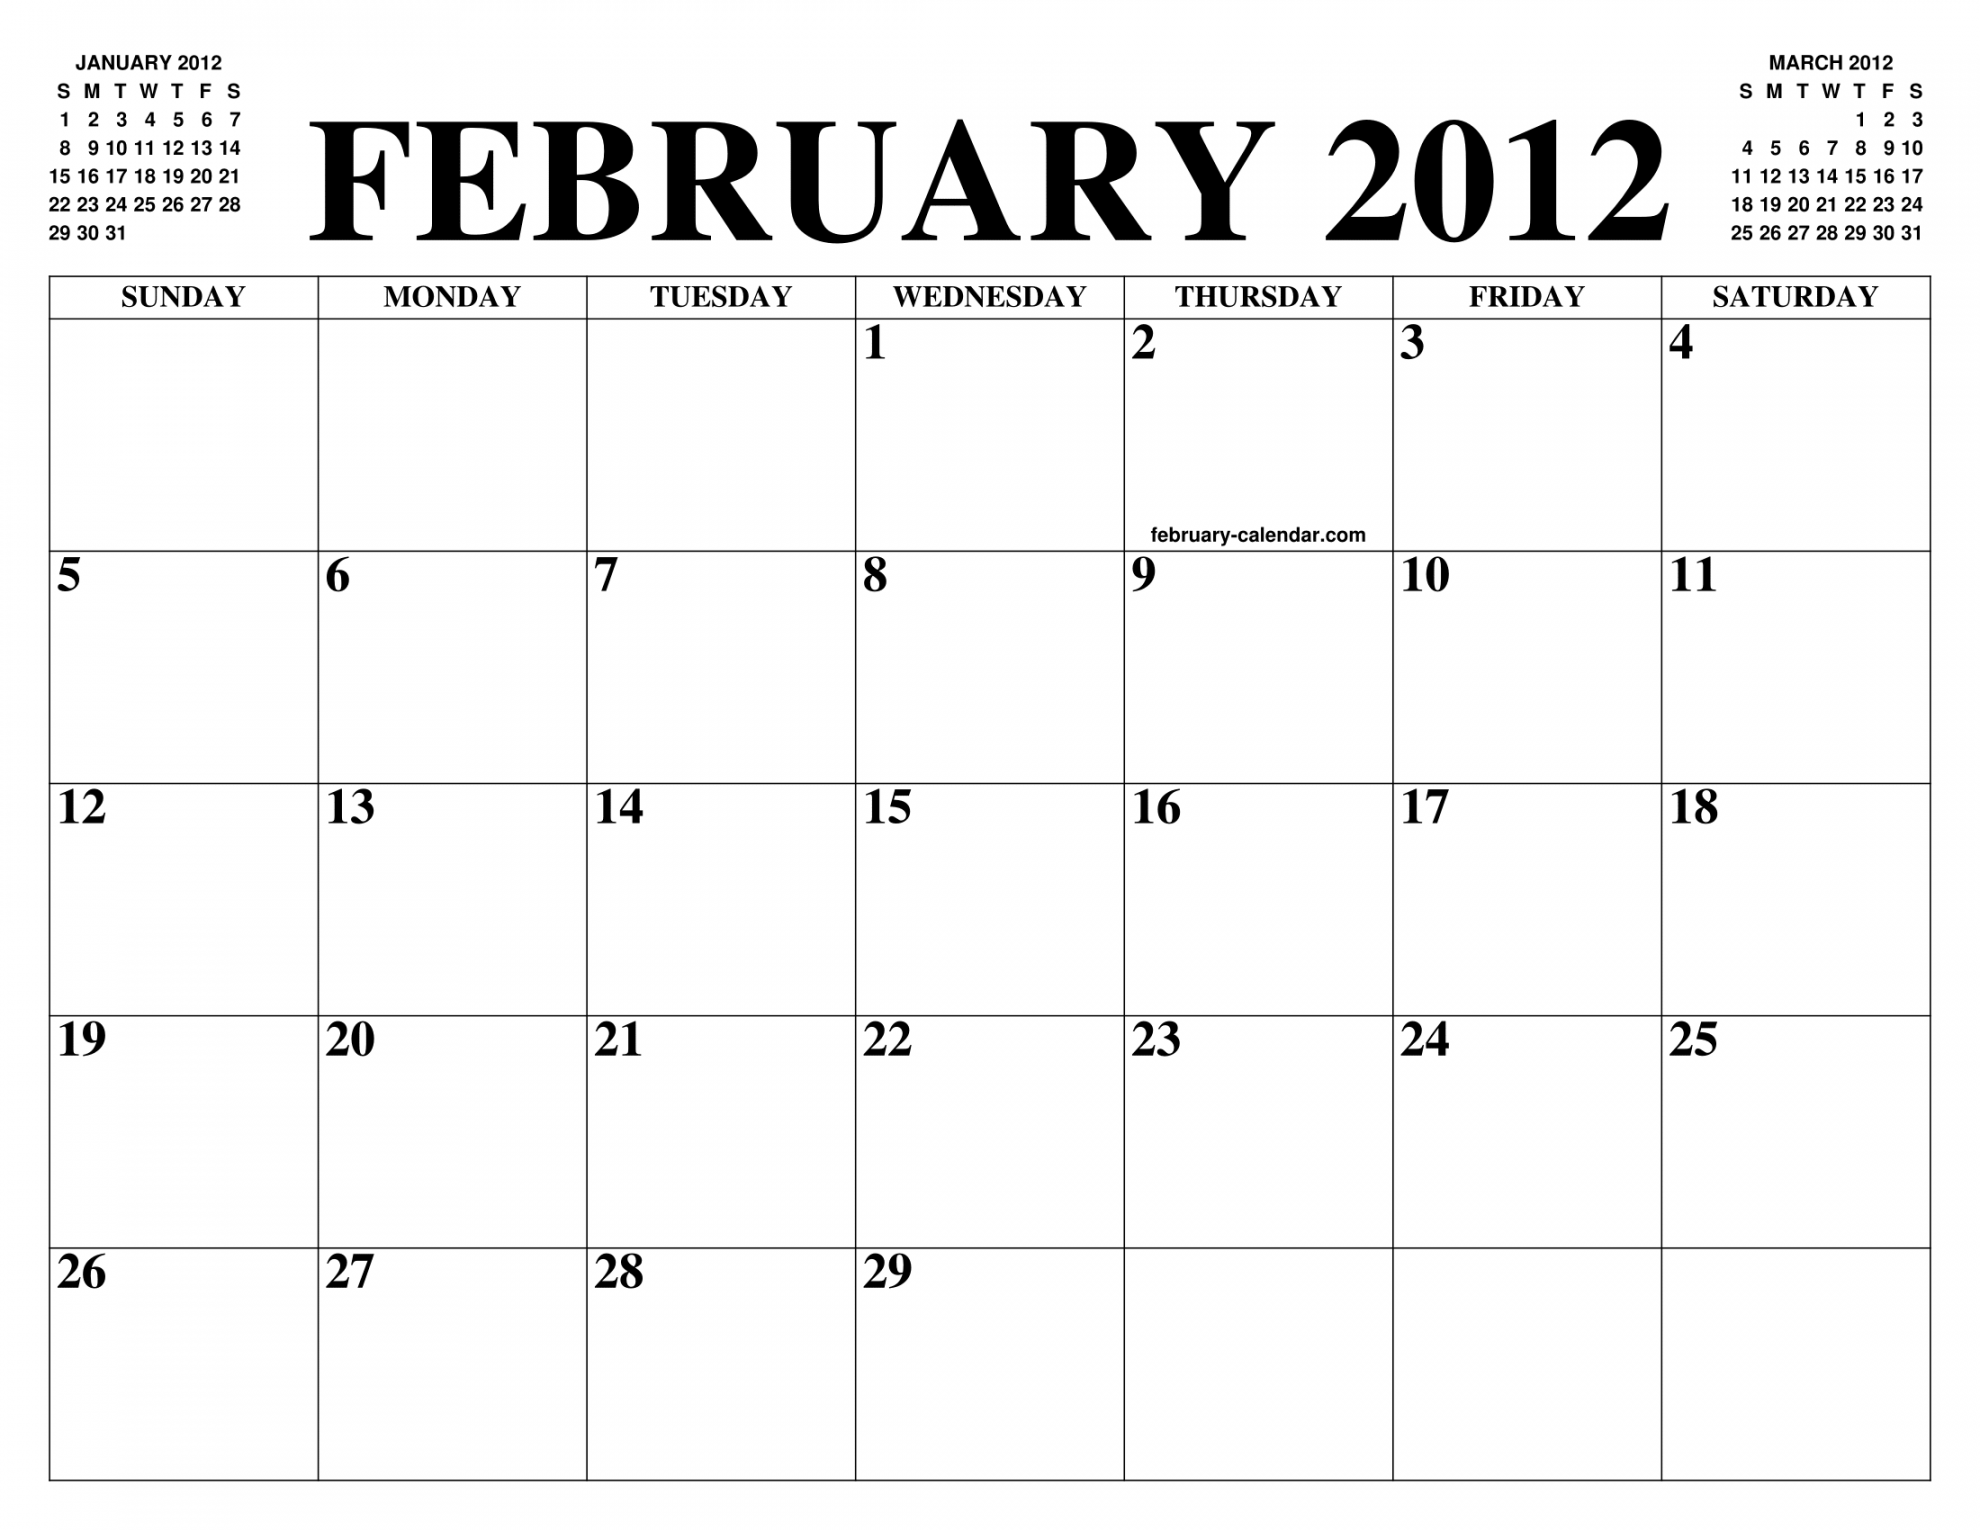 FEBRUARY CALENDAR OF THE MONTH: FREE PRINTABLE FEBRUARY